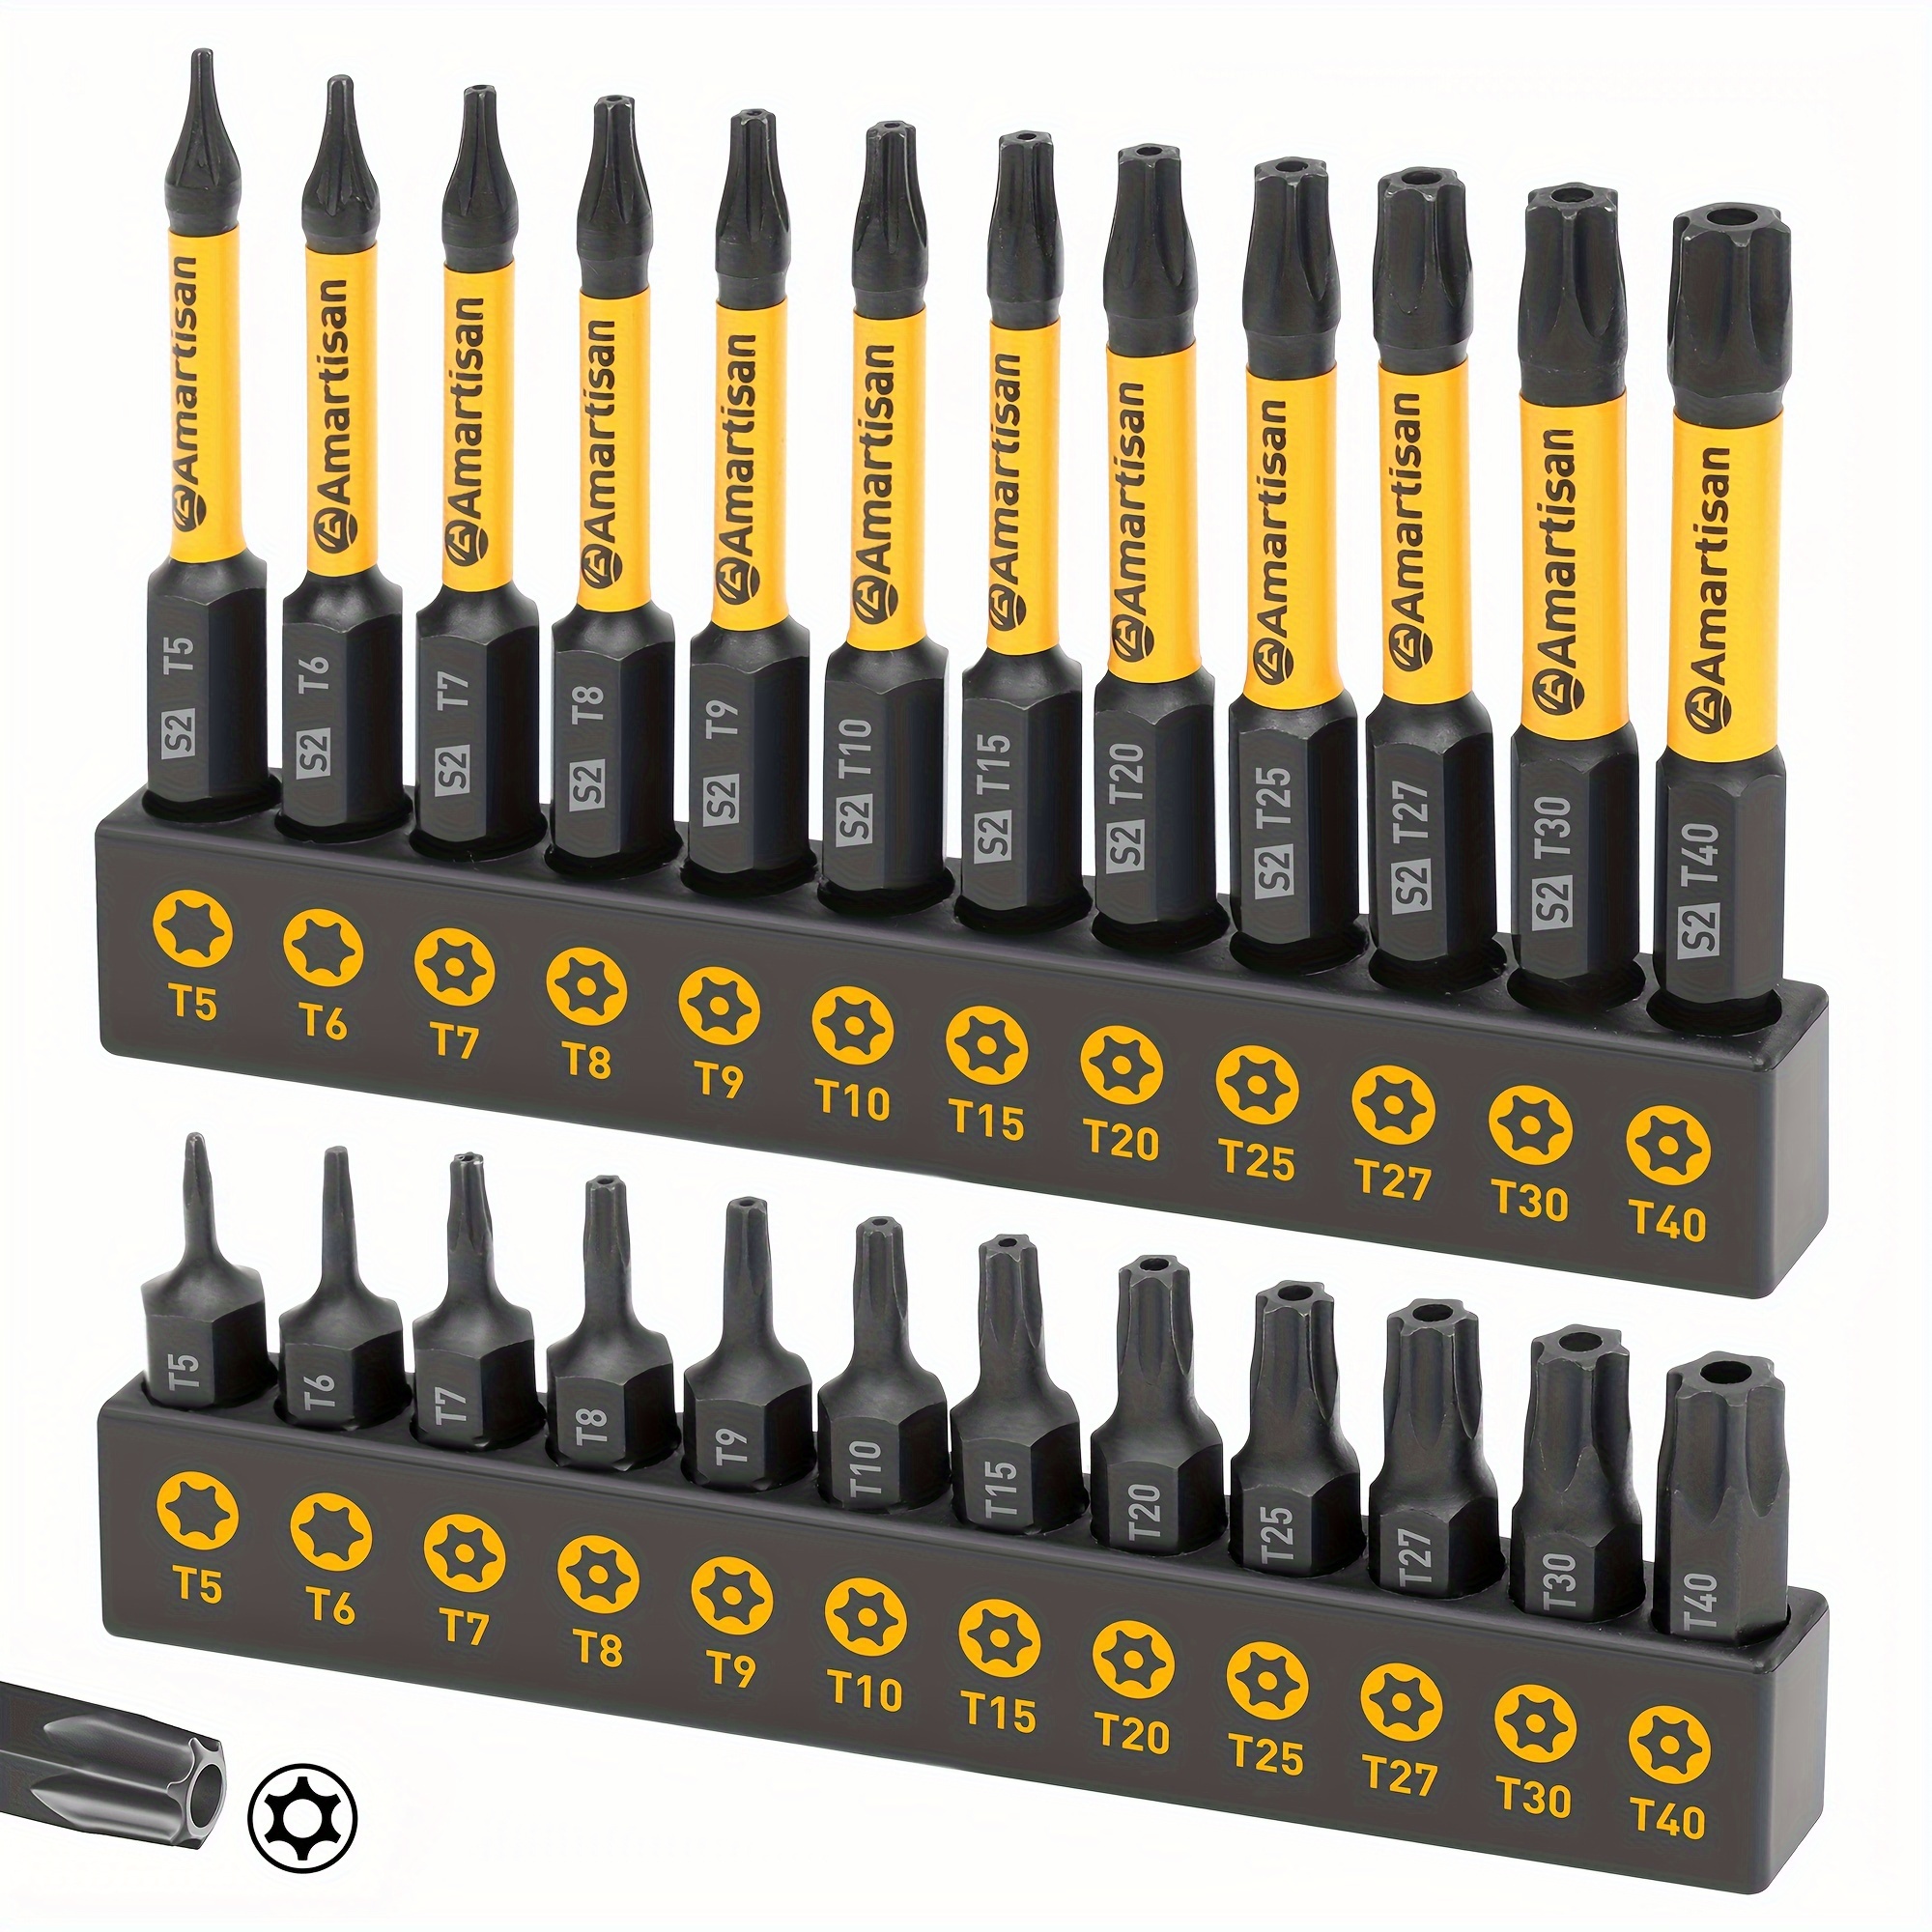 

24-piece Torx Bit Set, Security And Tamper Resistant Star Bits Set S2 Steel, 1" And 2.3" Long T5 - T40